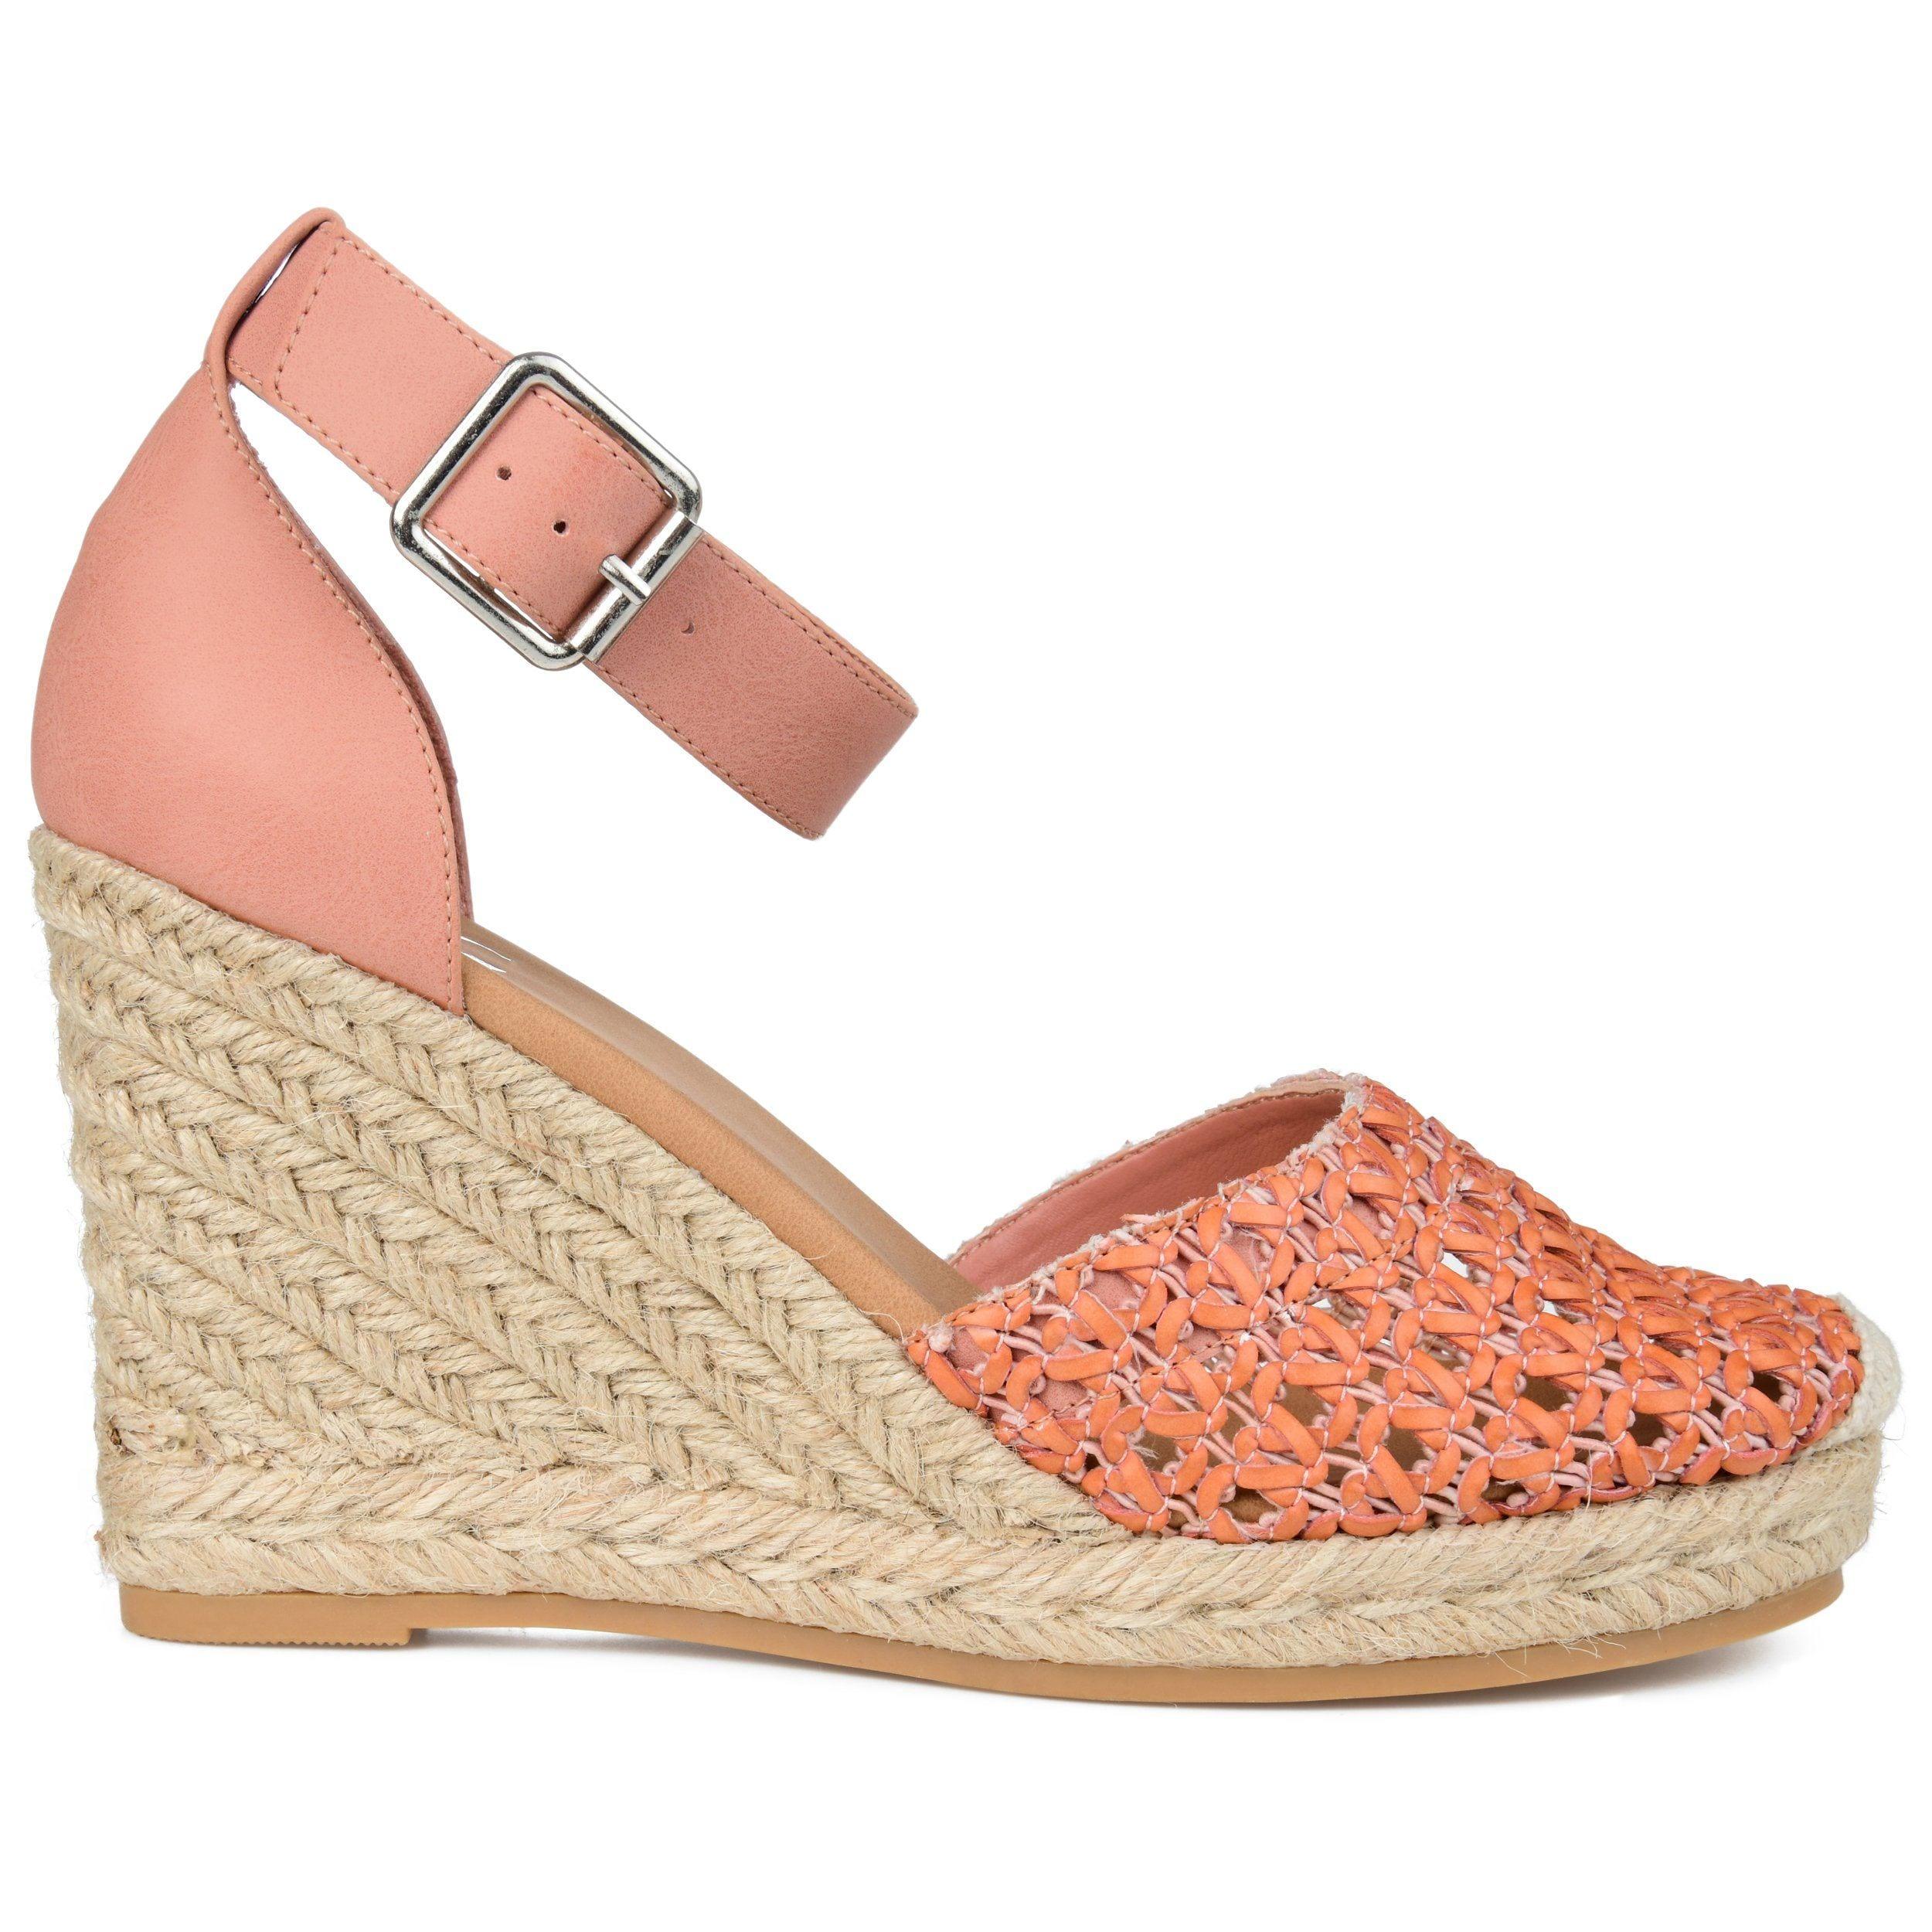 Espadrille Shoes: 15 Stylish Women's Espadrilles for Any Occasion or Vibe